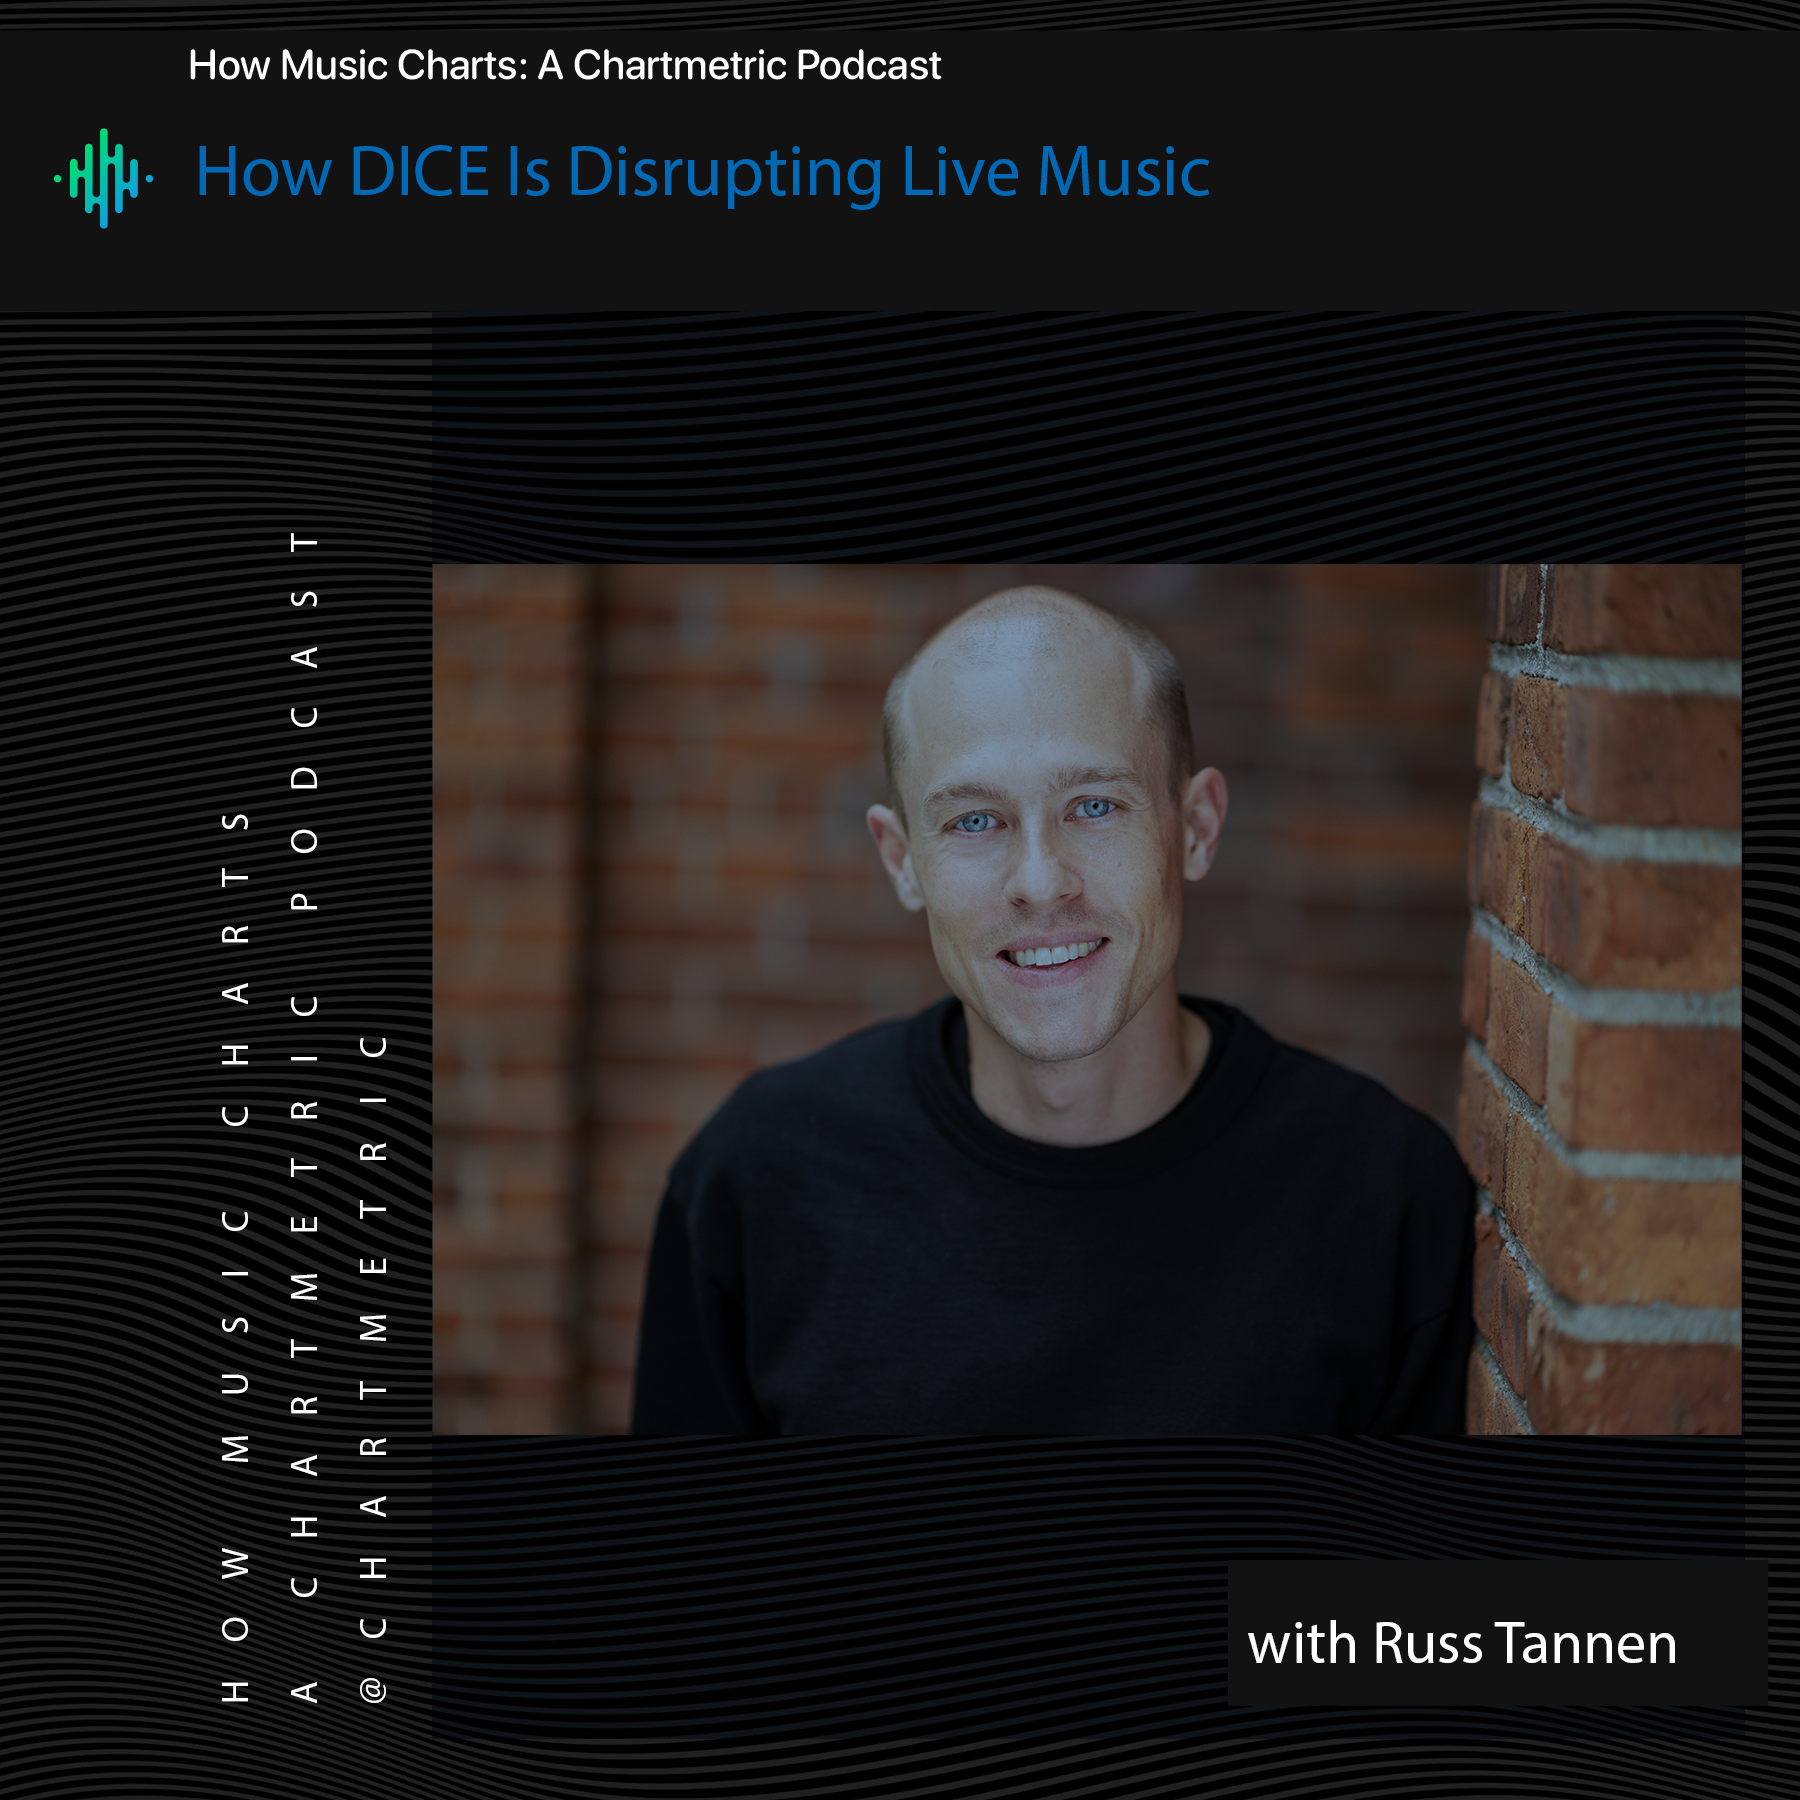 Disrupting Live Music With DICE President Russ Tannen